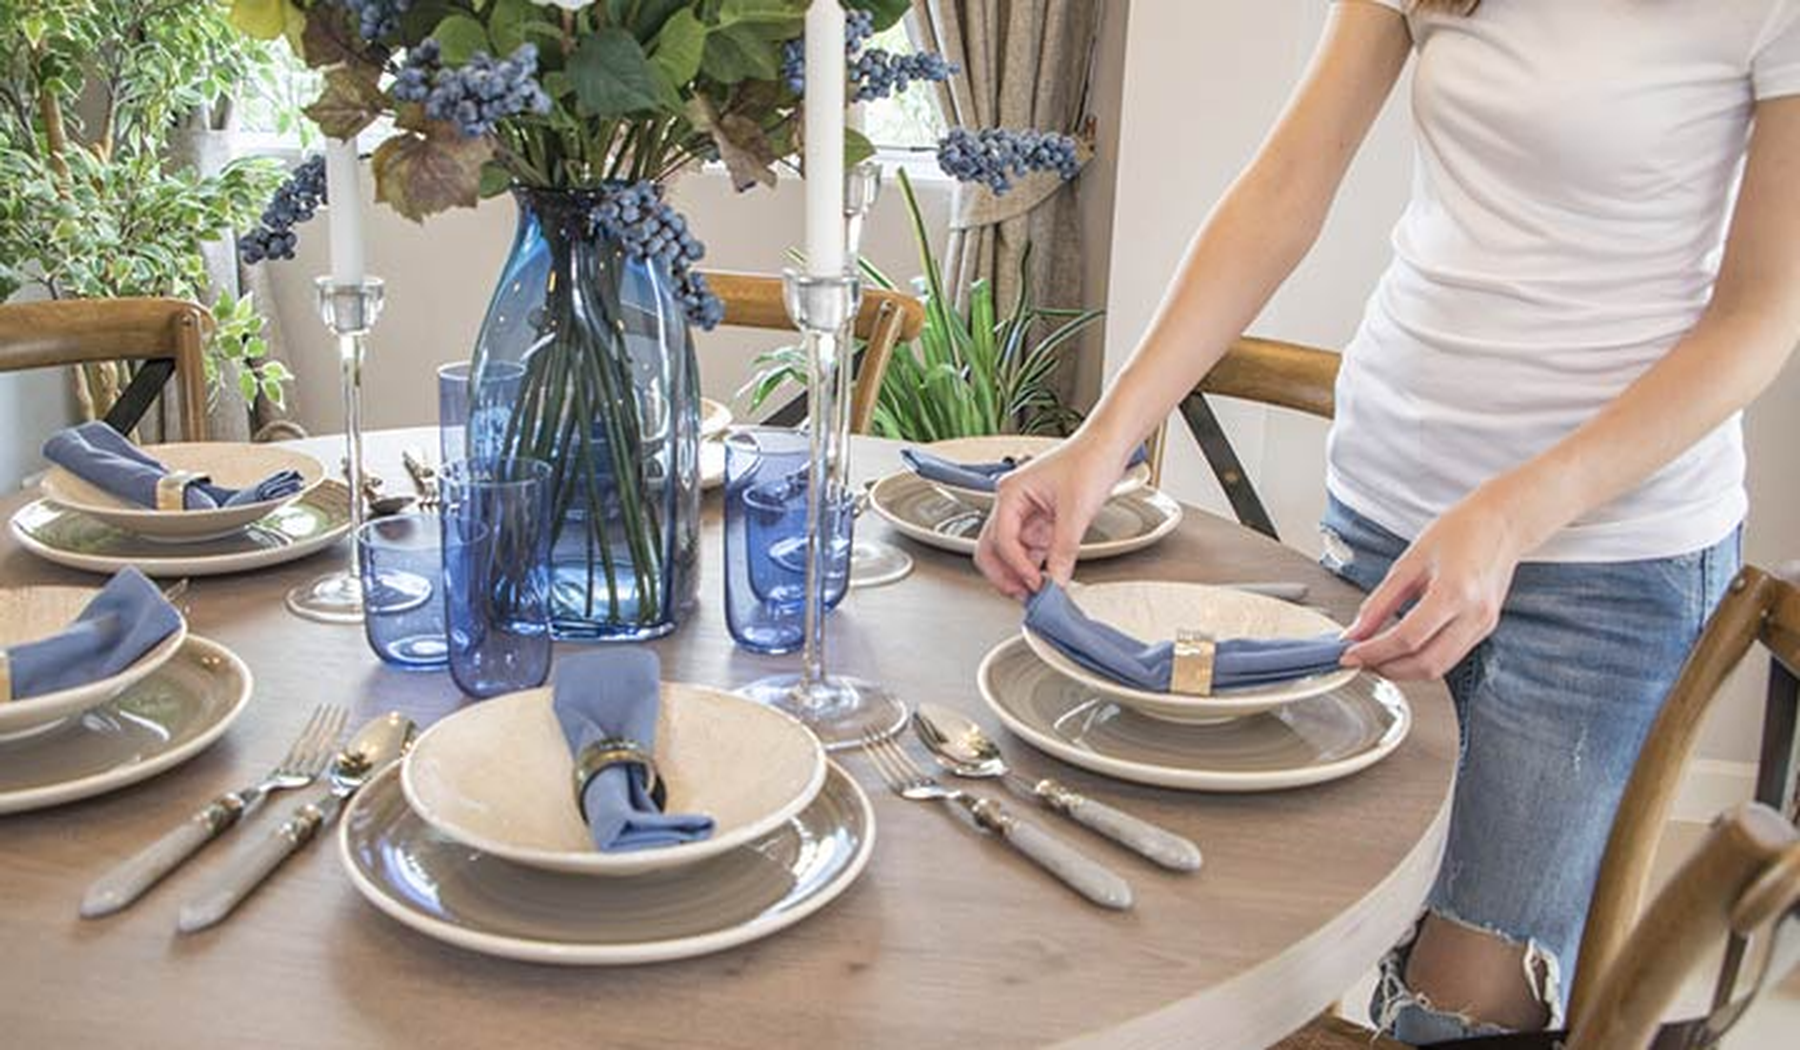 Woman setting a table with white dishes and blue accessories